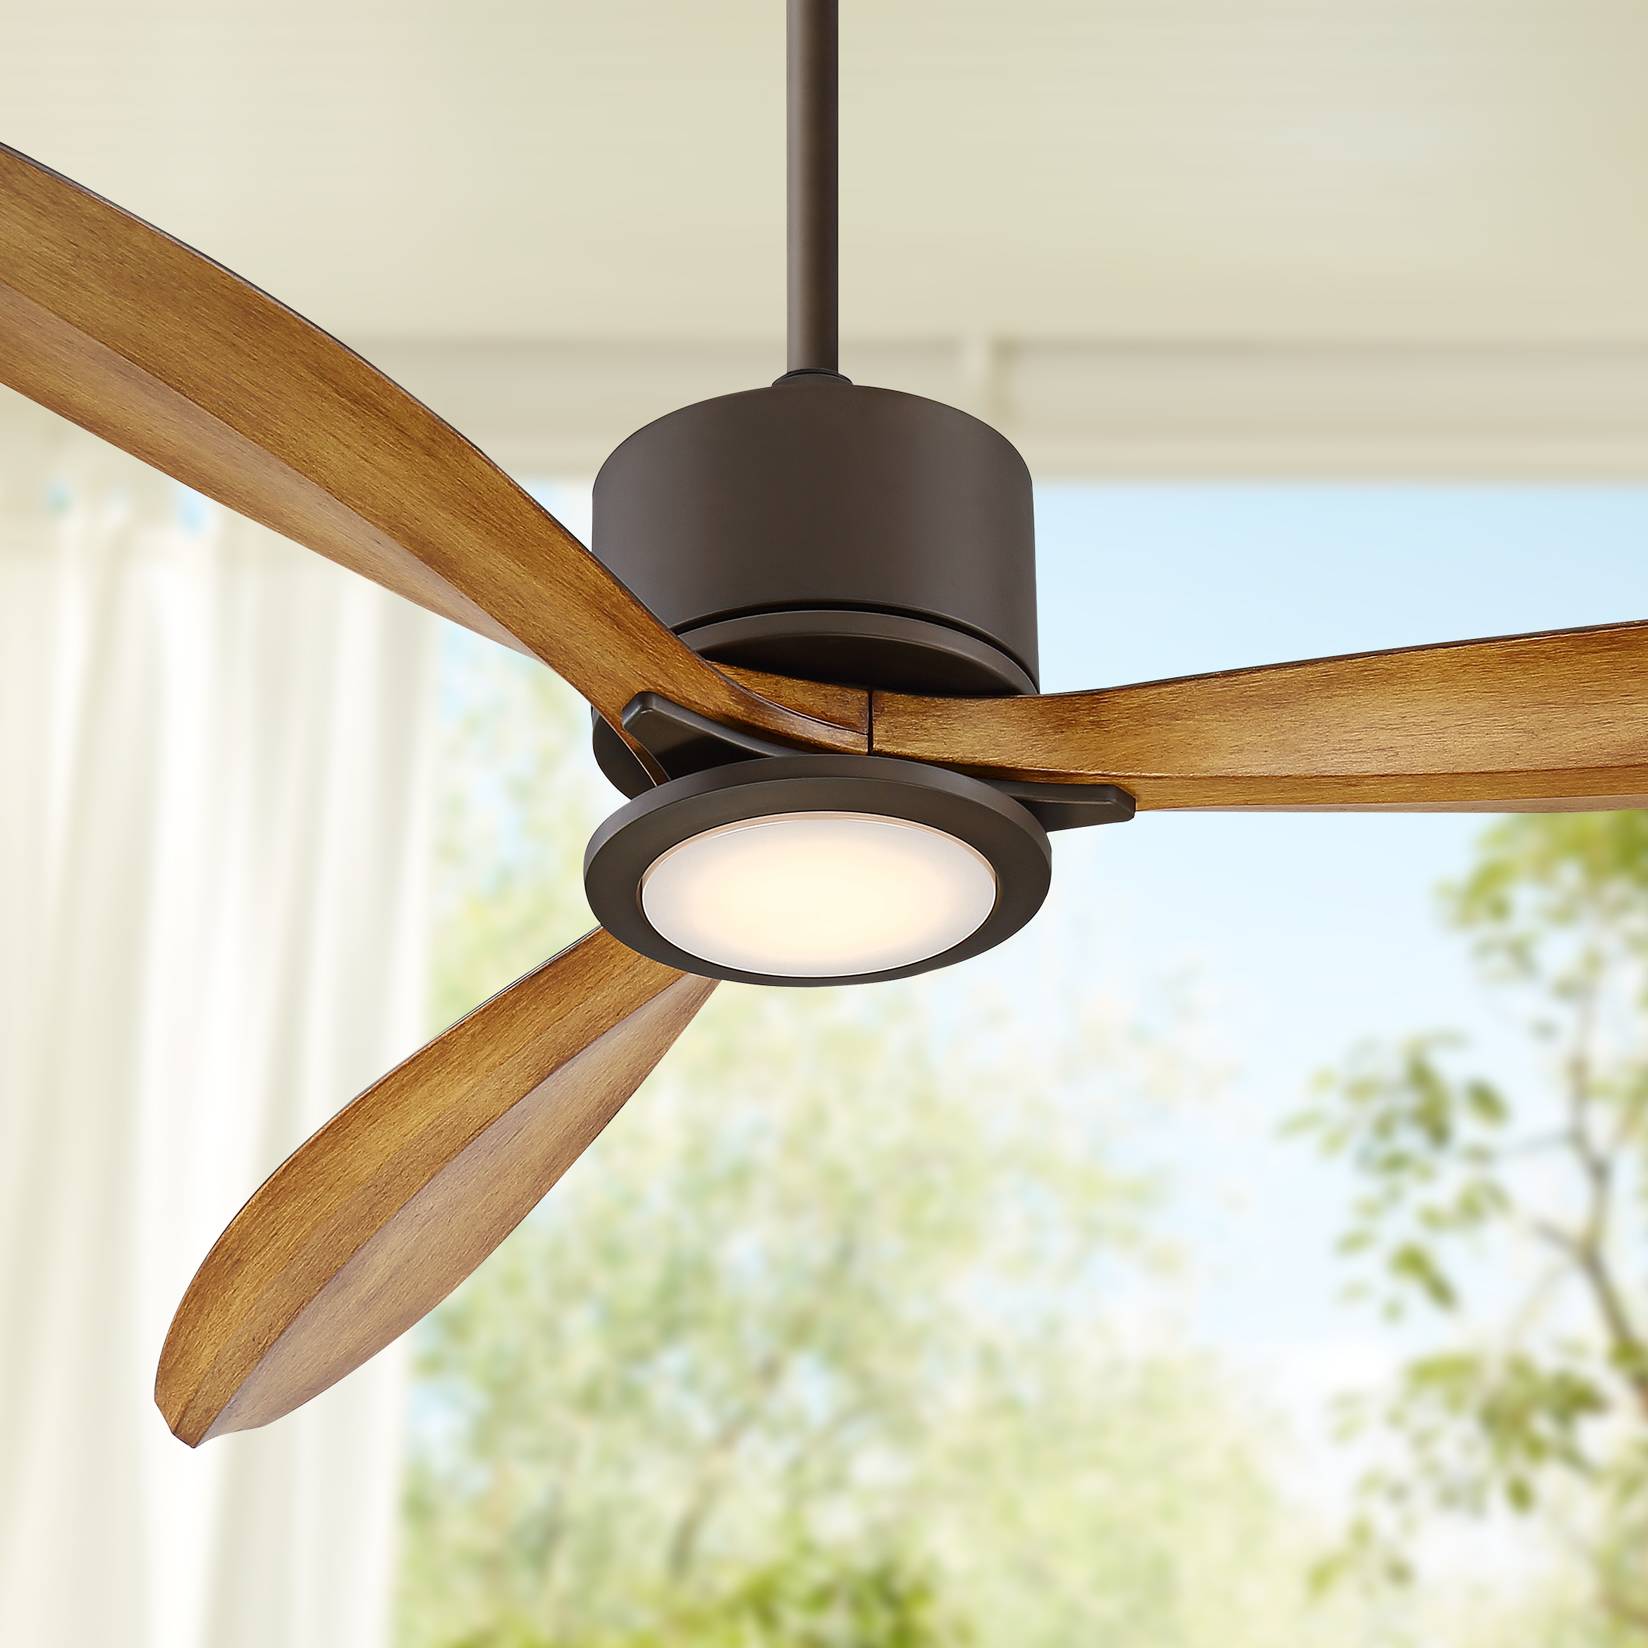 Details About 56 Tropical Outdoor Ceiling Fan With Light Led Remote Bronze Damp Patio Porch